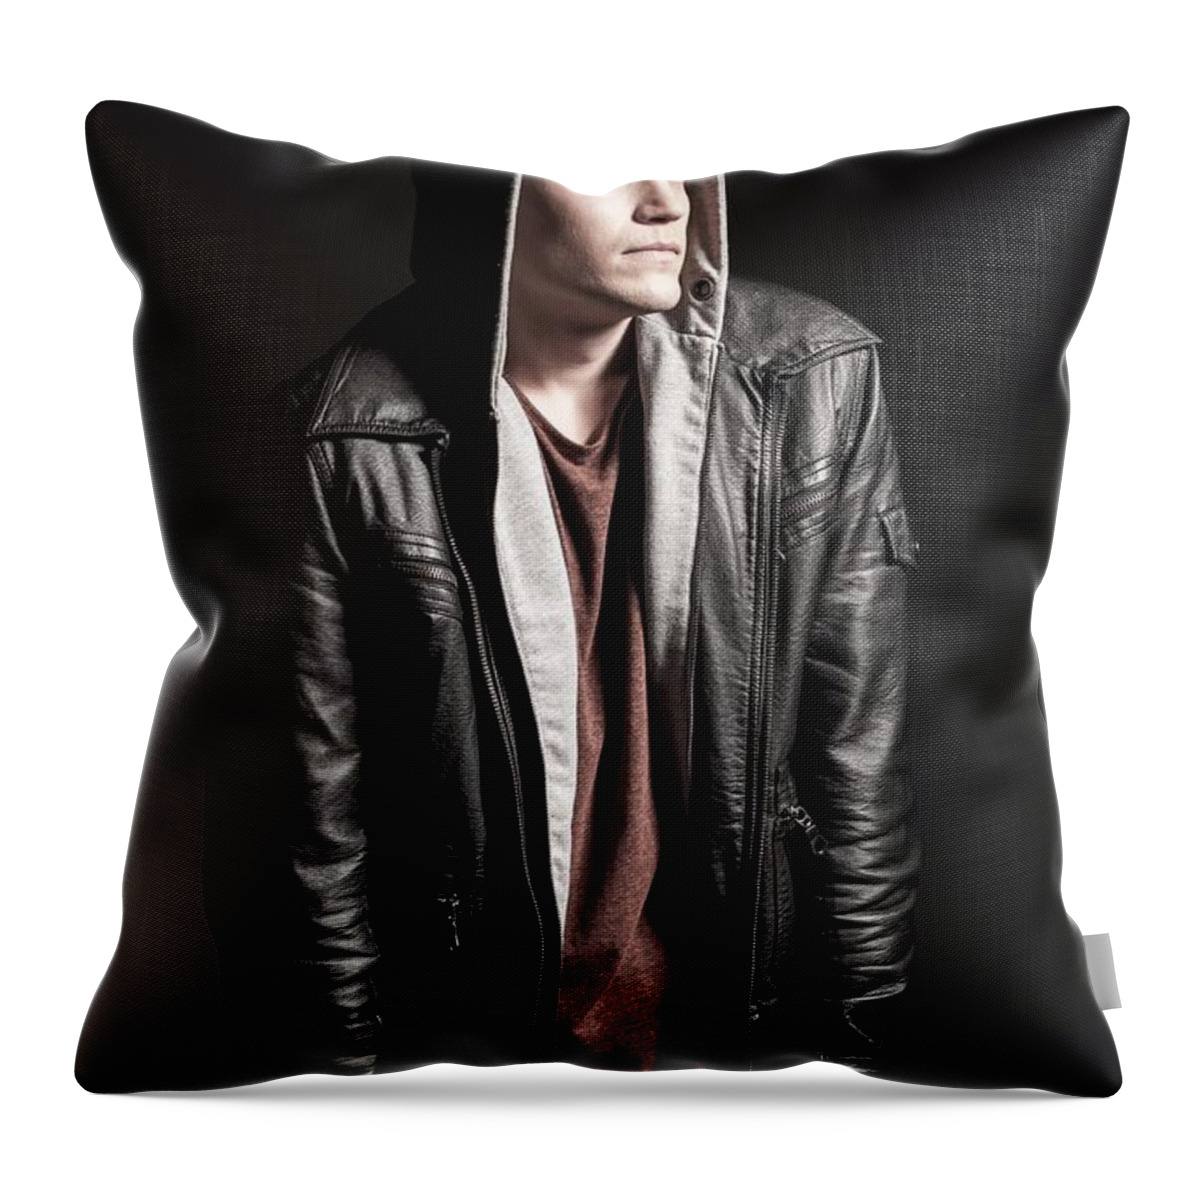 Art Throw Pillow featuring the photograph Hoodie by Nic Westaway